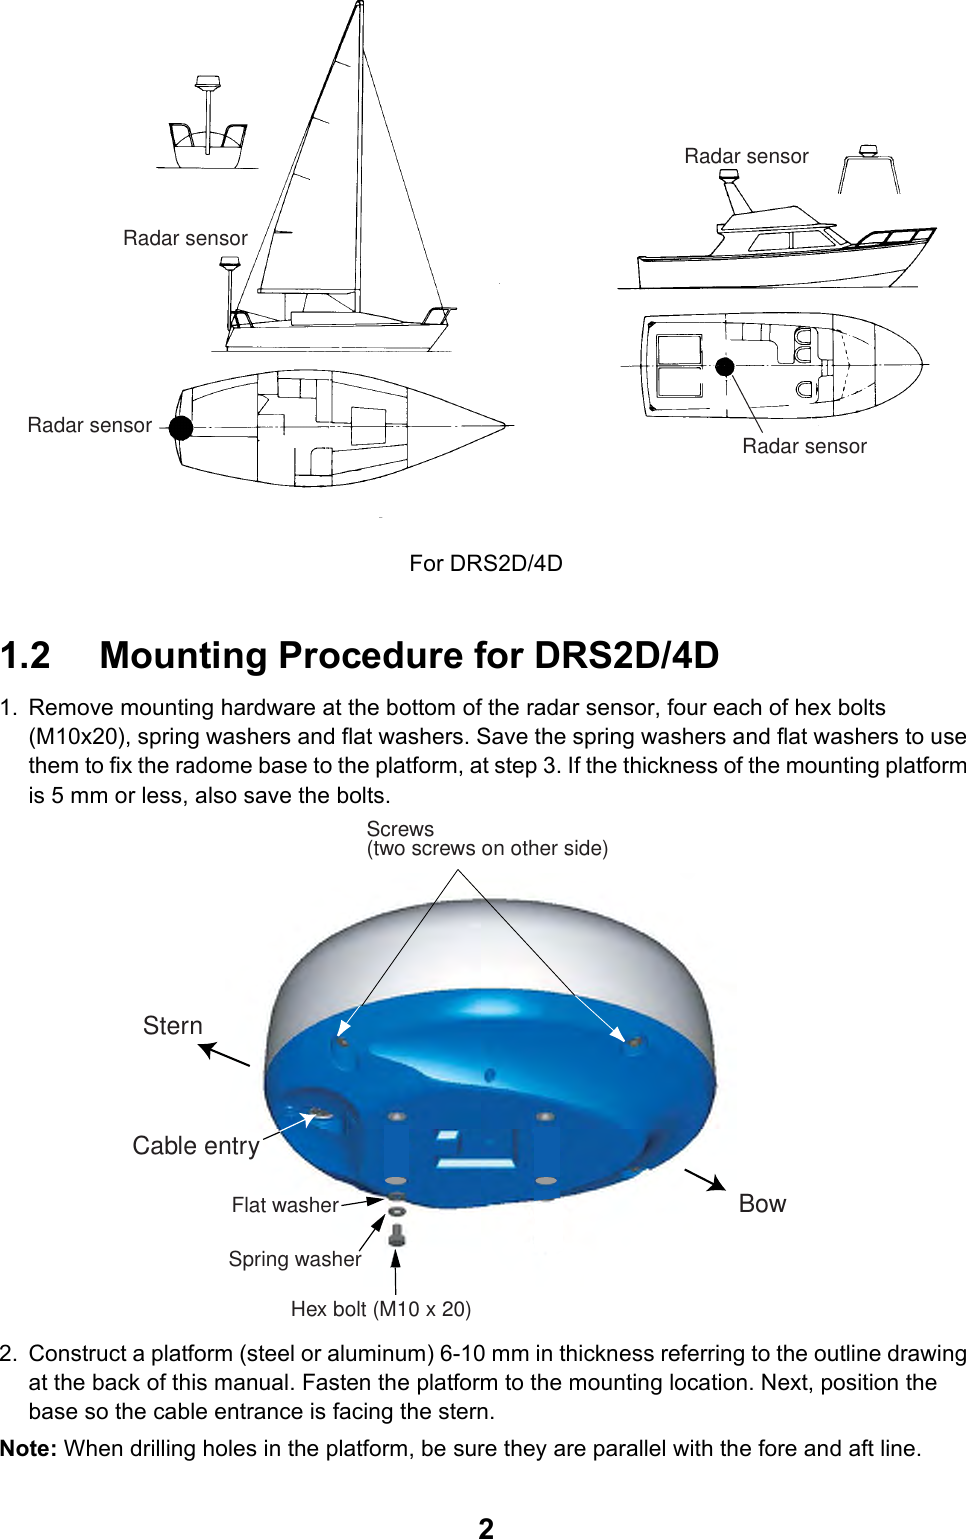 2For DRS2D/4D1.2 Mounting Procedure for DRS2D/4D1. Remove mounting hardware at the bottom of the radar sensor, four each of hex bolts (M10x20), spring washers and flat washers. Save the spring washers and flat washers to use them to fix the radome base to the platform, at step 3. If the thickness of the mounting platform is 5 mm or less, also save the bolts.2. Construct a platform (steel or aluminum) 6-10 mm in thickness referring to the outline drawing at the back of this manual. Fasten the platform to the mounting location. Next, position the base so the cable entrance is facing the stern.Note: When drilling holes in the platform, be sure they are parallel with the fore and aft line.Radar sensorRadar sensorRadar sensorRadar sensorScrews(two screws on other side)SternBowCable entryHex bolt (M10 x 20)Spring washerFlat washer